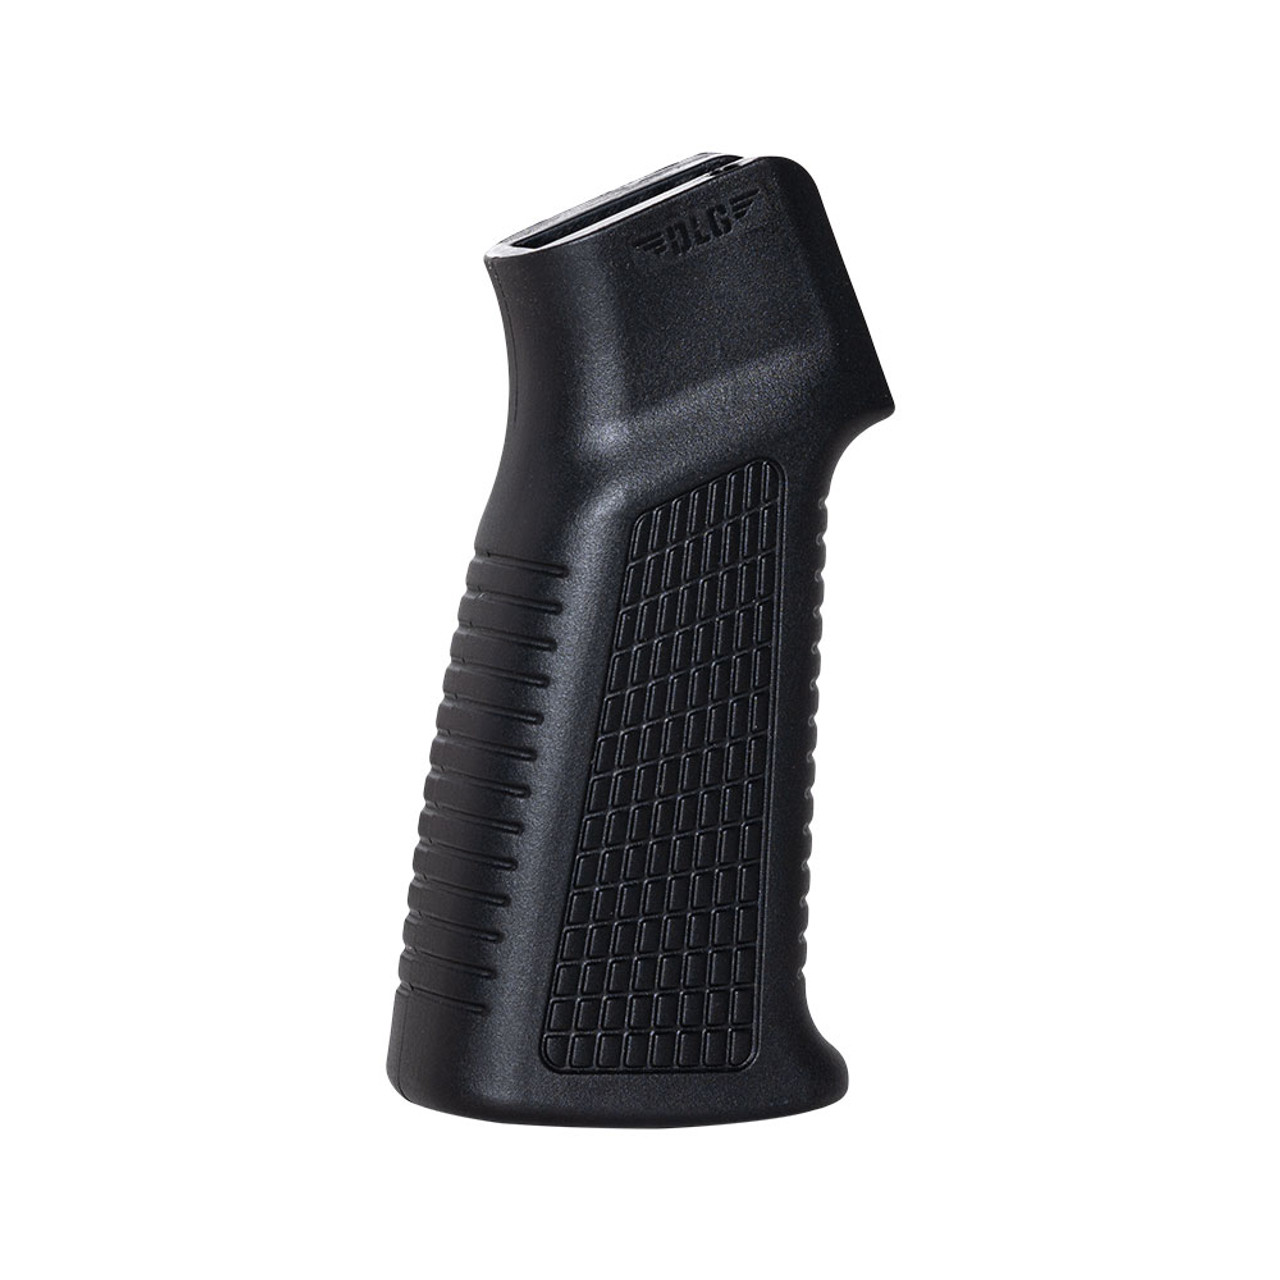 NcSTAR Standard AR-15 Pistol with Storage Compartment Grip Polymer